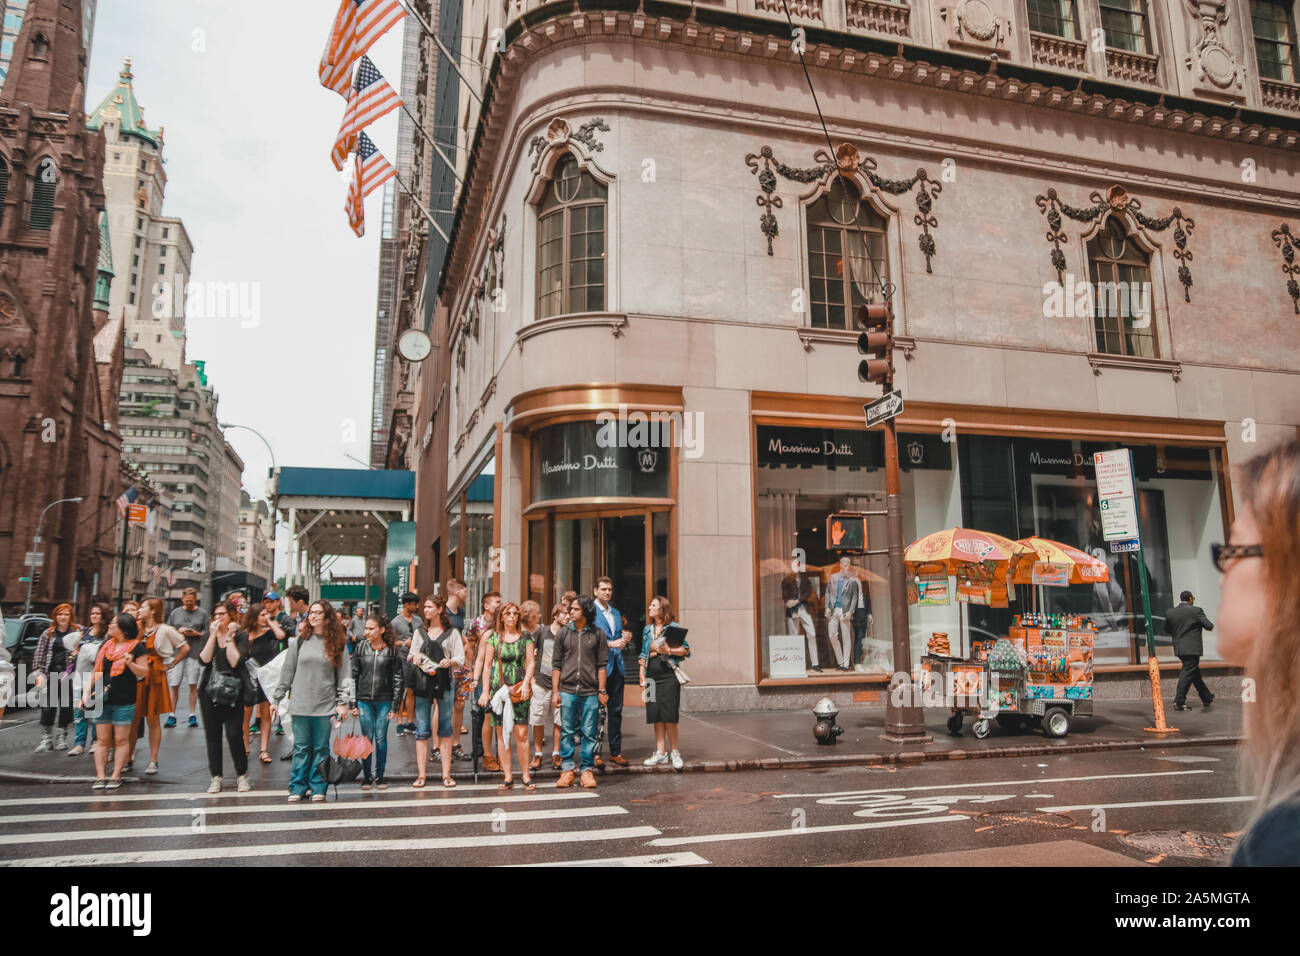 New York, USA - June 17, 2017: People passing on the main street crossroad  of NYC with building and flags background. Corner of Massimo Dutti shop  Stock Photo - Alamy